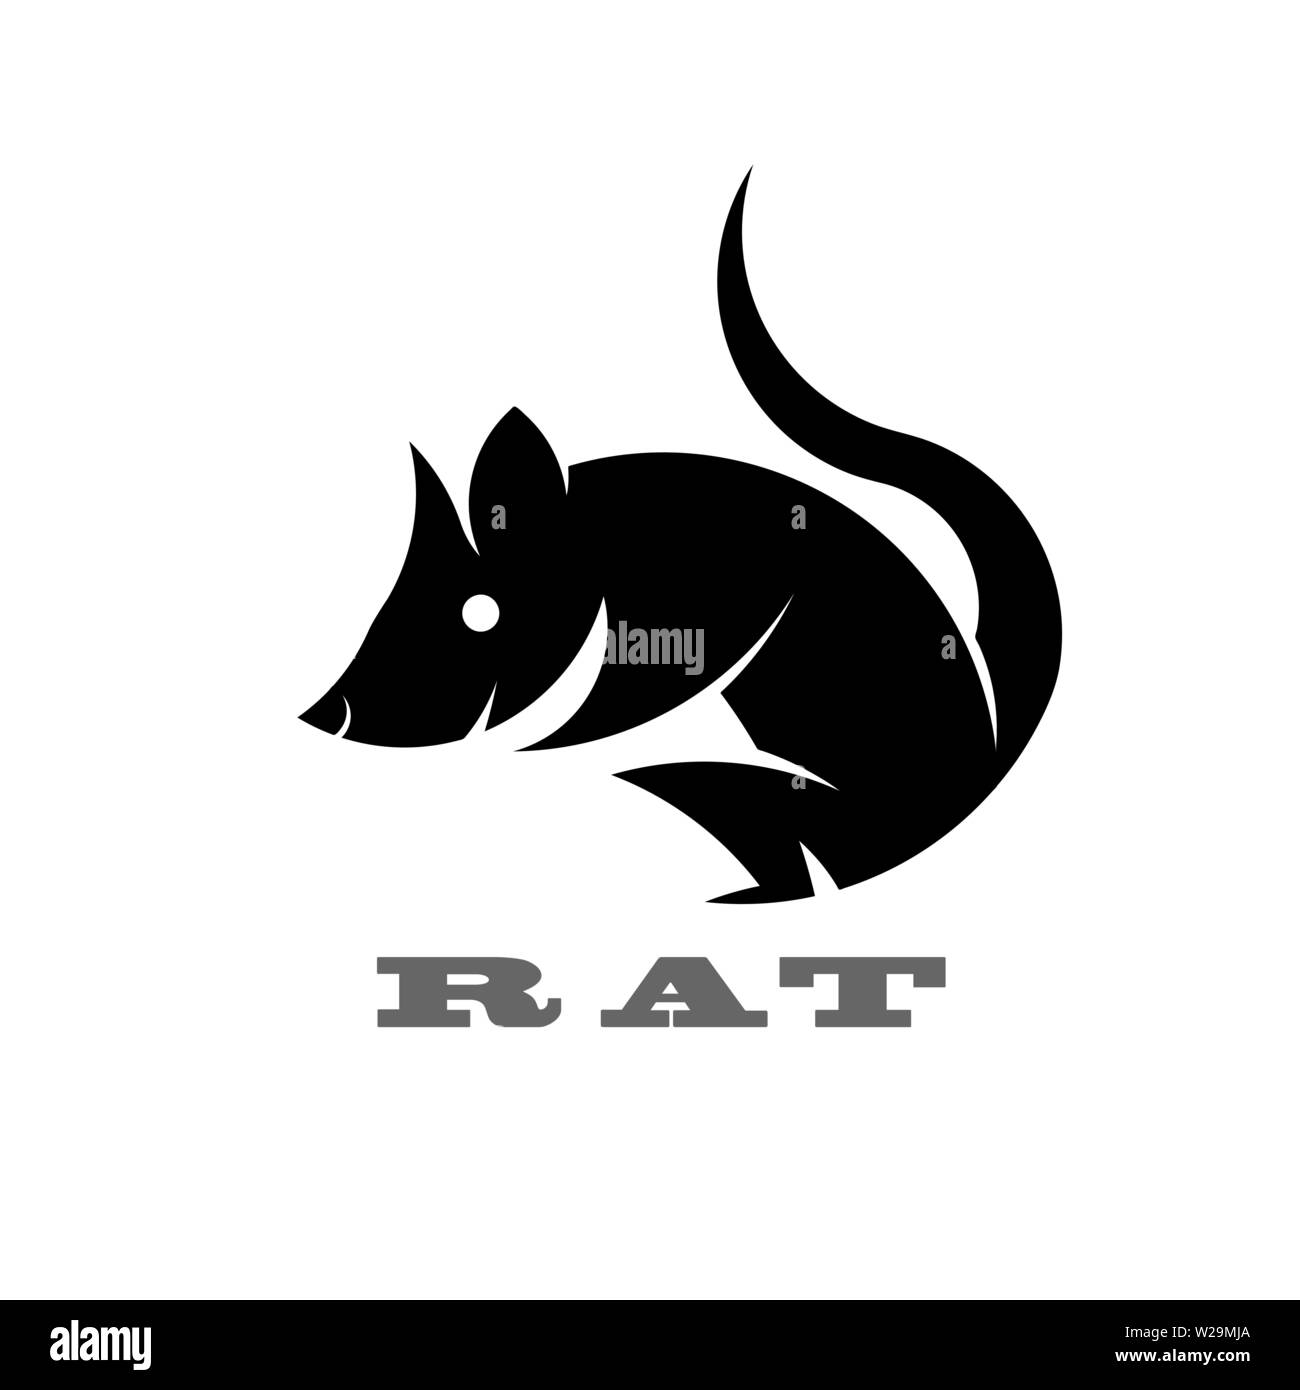 Simple shape of rat, icon or logo for web, mouse design with text on white background. vector illustration. Stock Vector